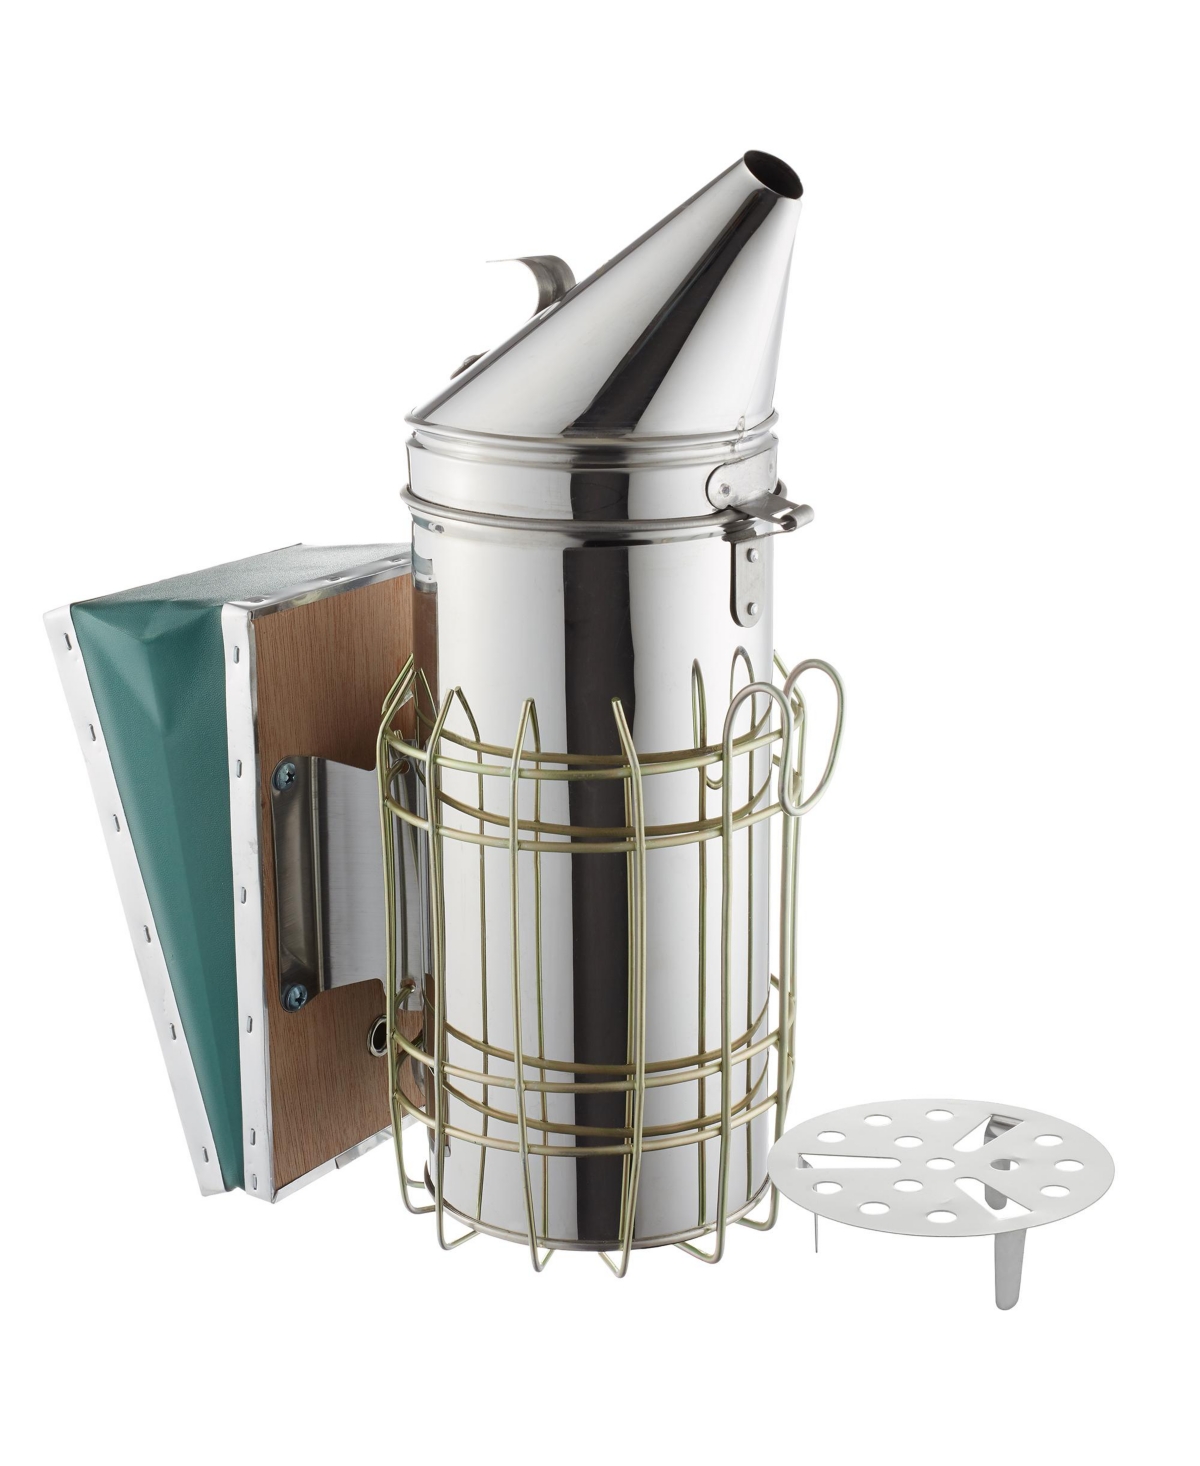 12-1/2 inch Bee Hive Smoker, Stainless Steel with Heat Shield, Beekeeping Equipment - Silver